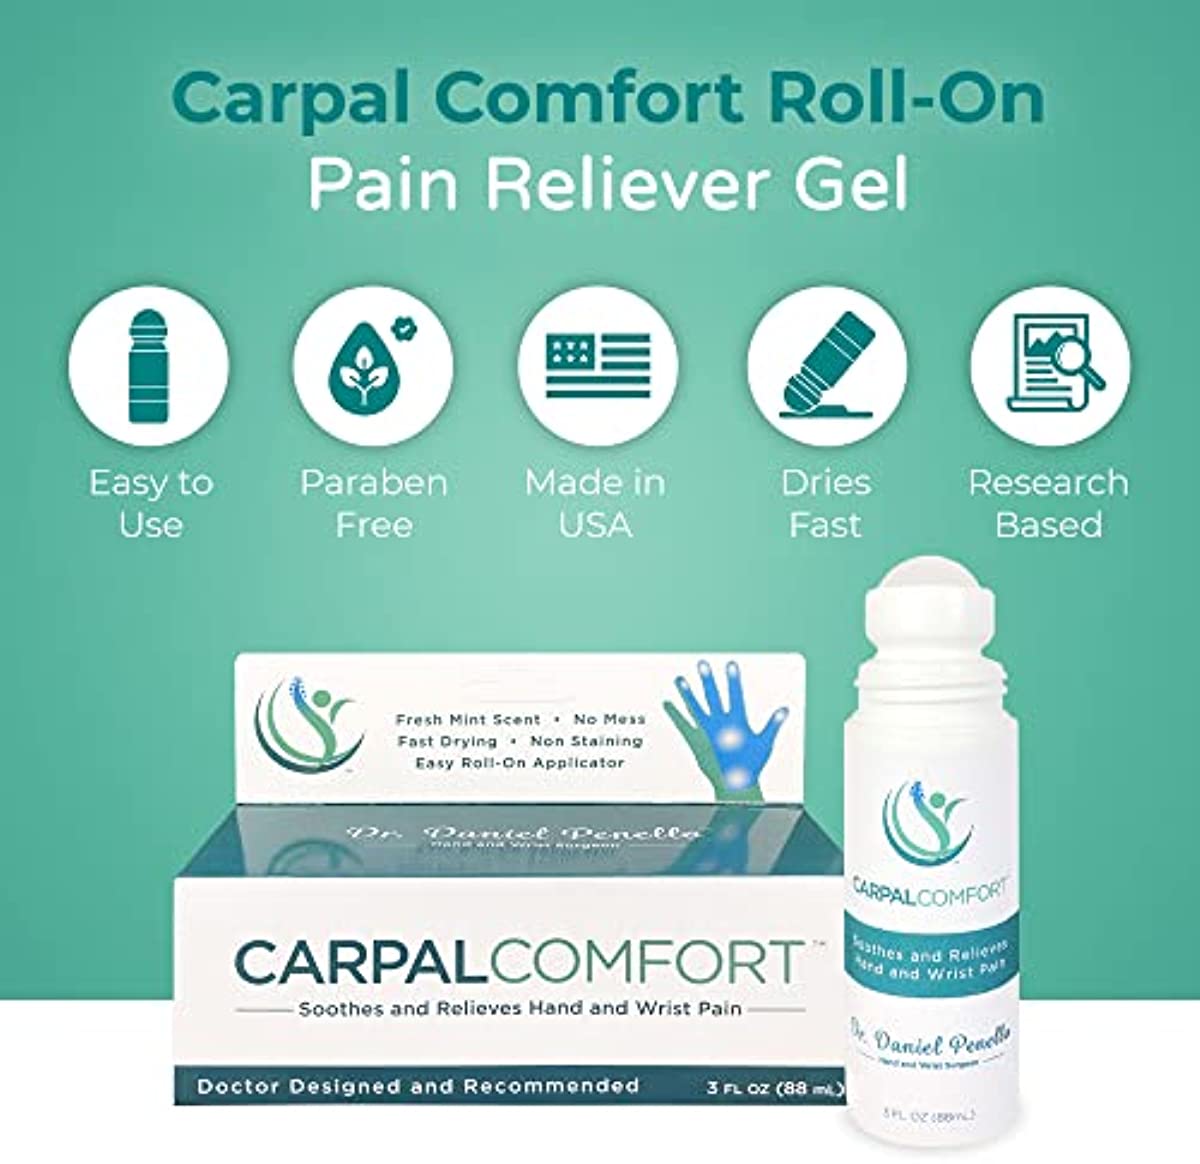 Carpal Comfort, Carpal Tunnel Roll On Relief for Wrist Pain and Hand Pain, 3 Fl Oz/88 mL